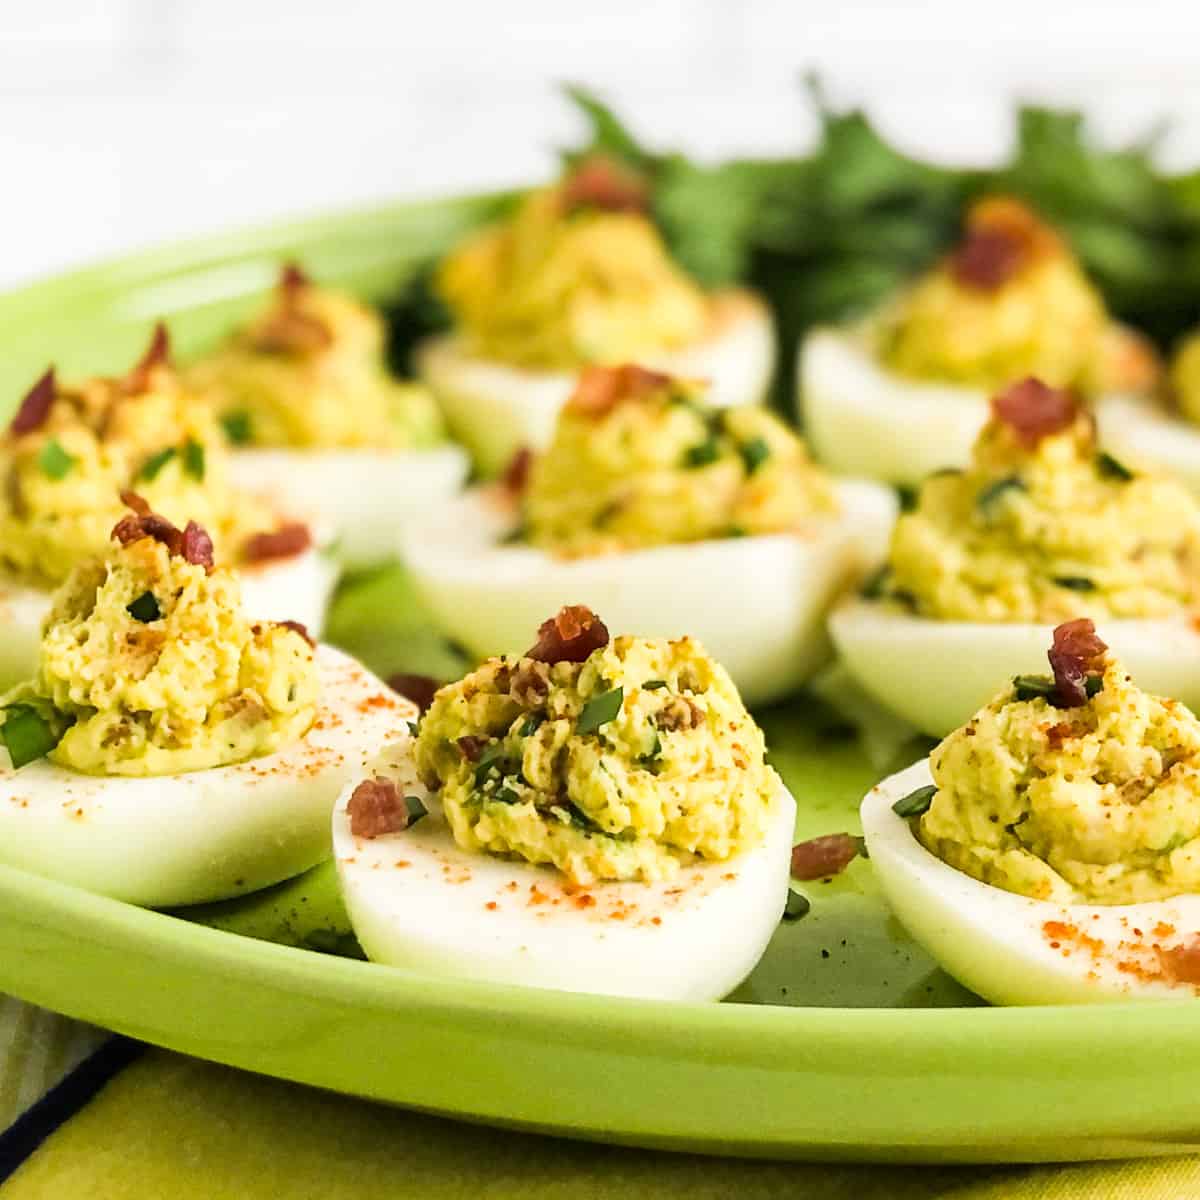 Avocado Deviled Eggs on a green plate garnished with parsley in the background.